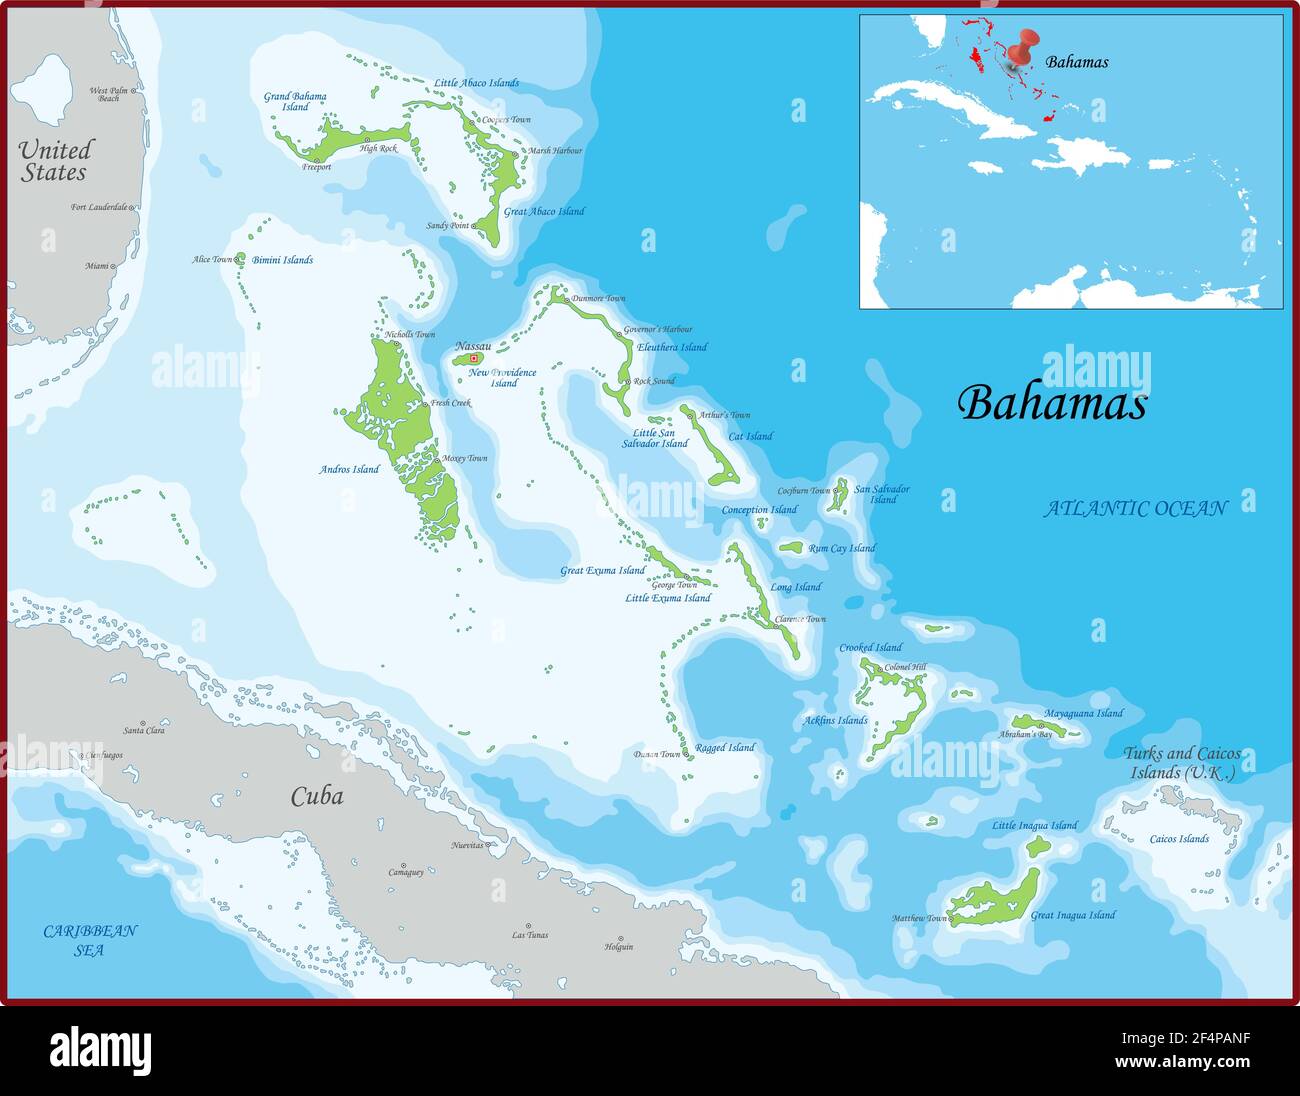 The Bahamas map was drawn with high detail and accuracy Stock Vector